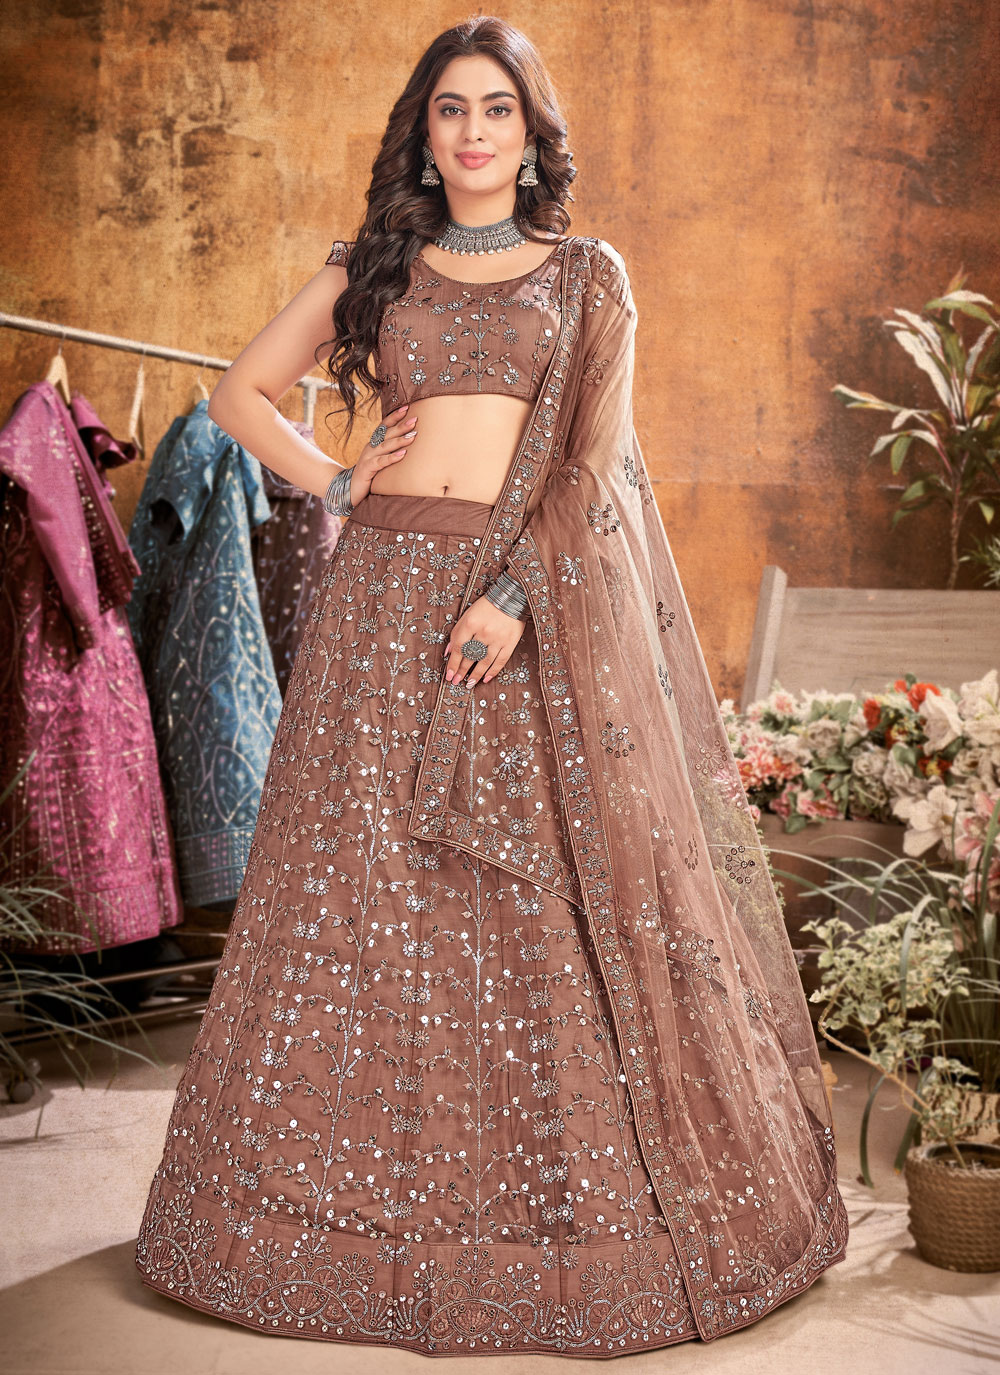 Which color lehenga choli suits on fair complexion? - Quora